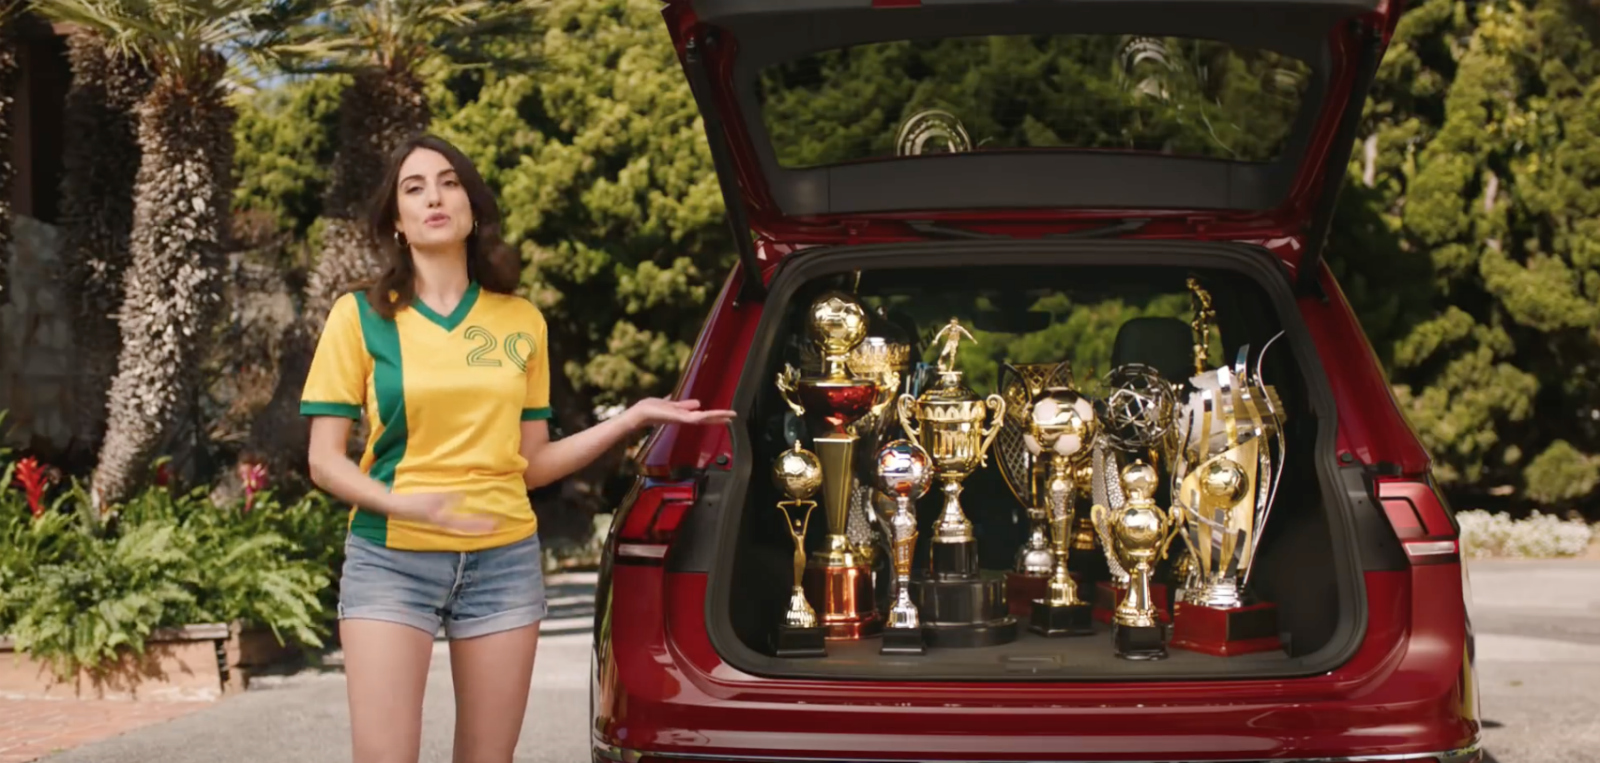 volkswagen gti mobile ads world cup